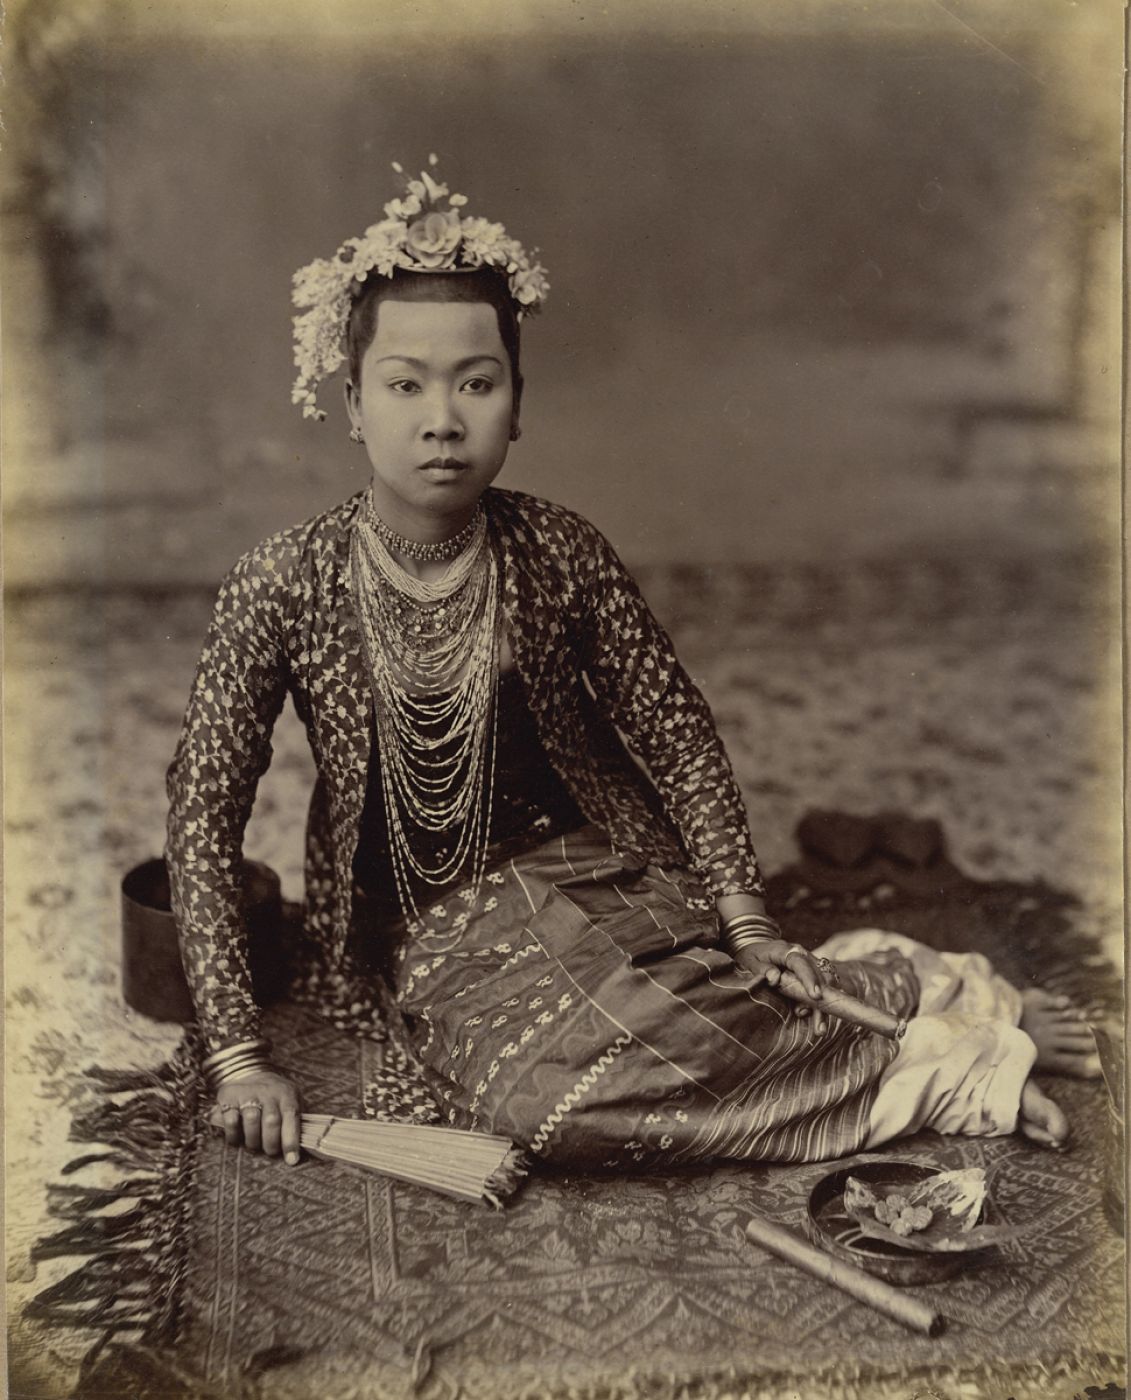 Philip Adolphe Klier, “Burmese Woman with Fan and Cigar”, 1880 ca.